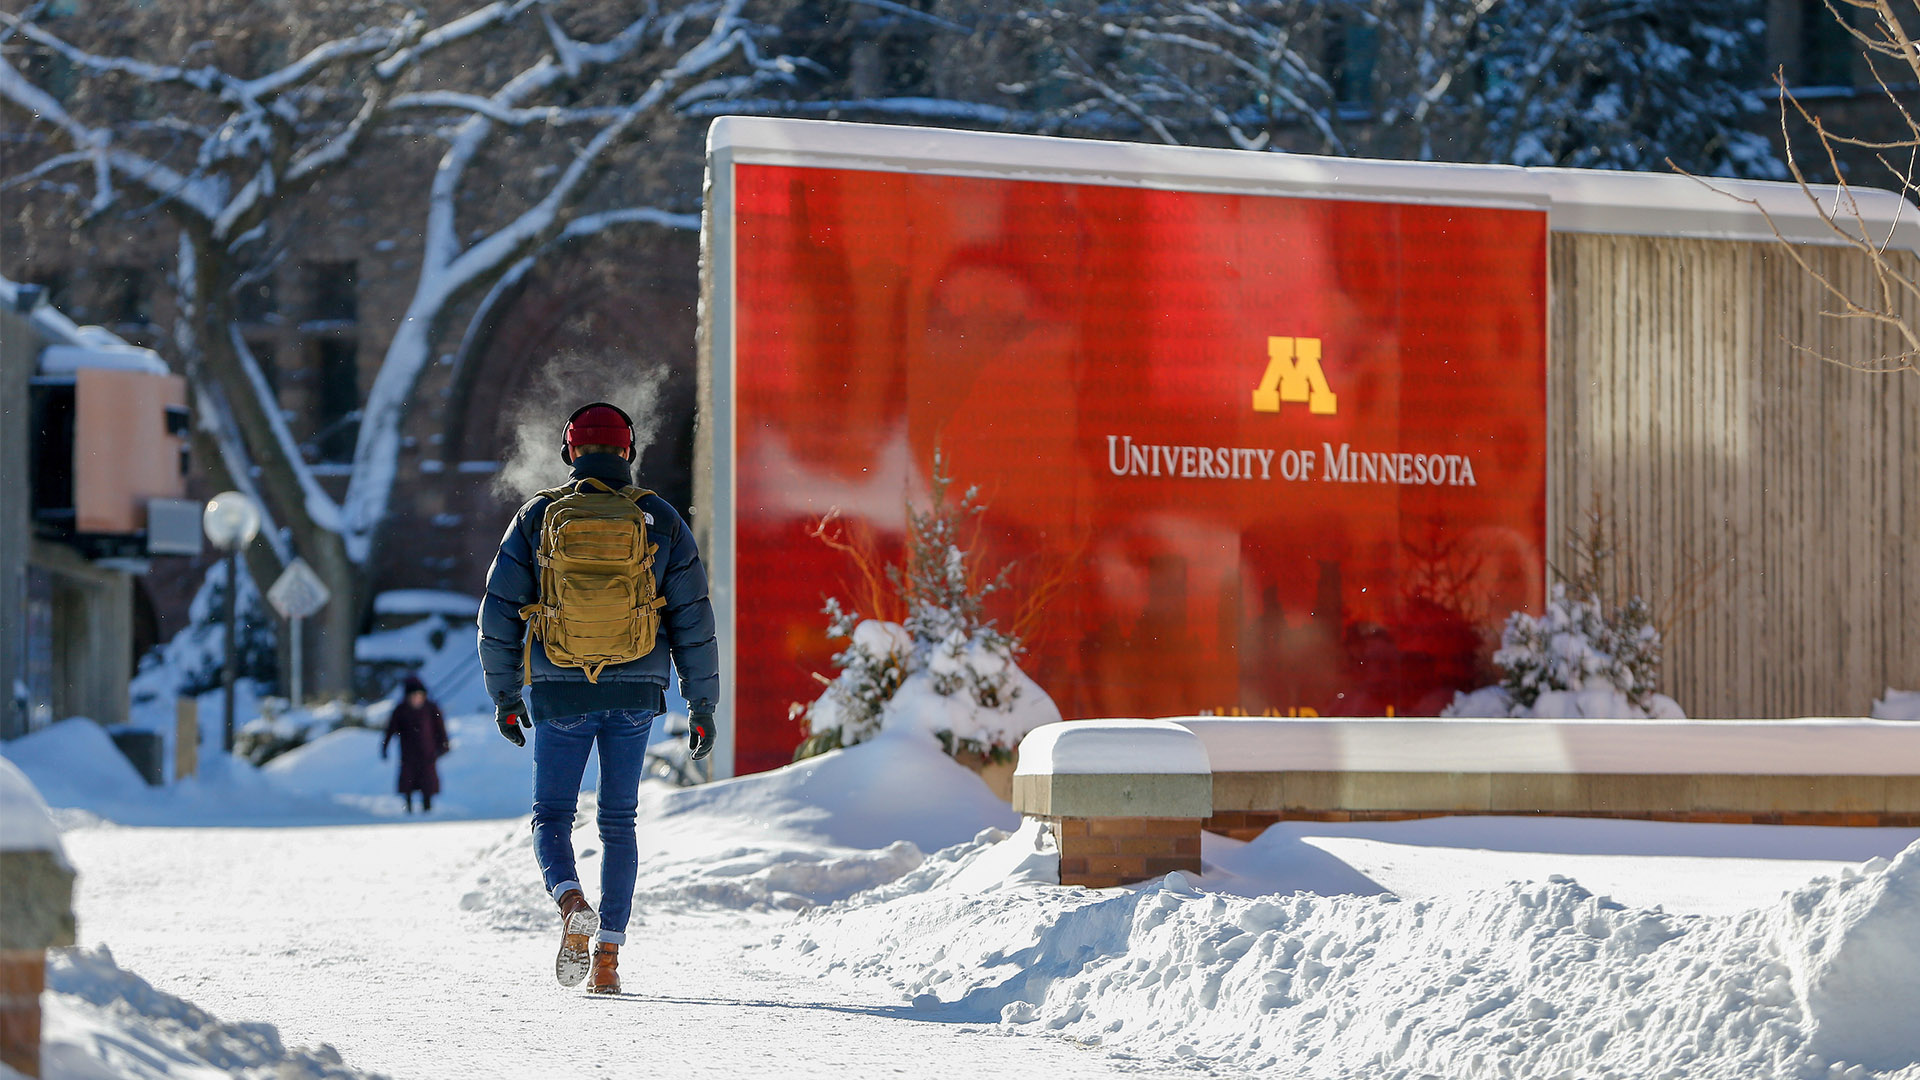 A student walks past a U of M sign on a snowy campus